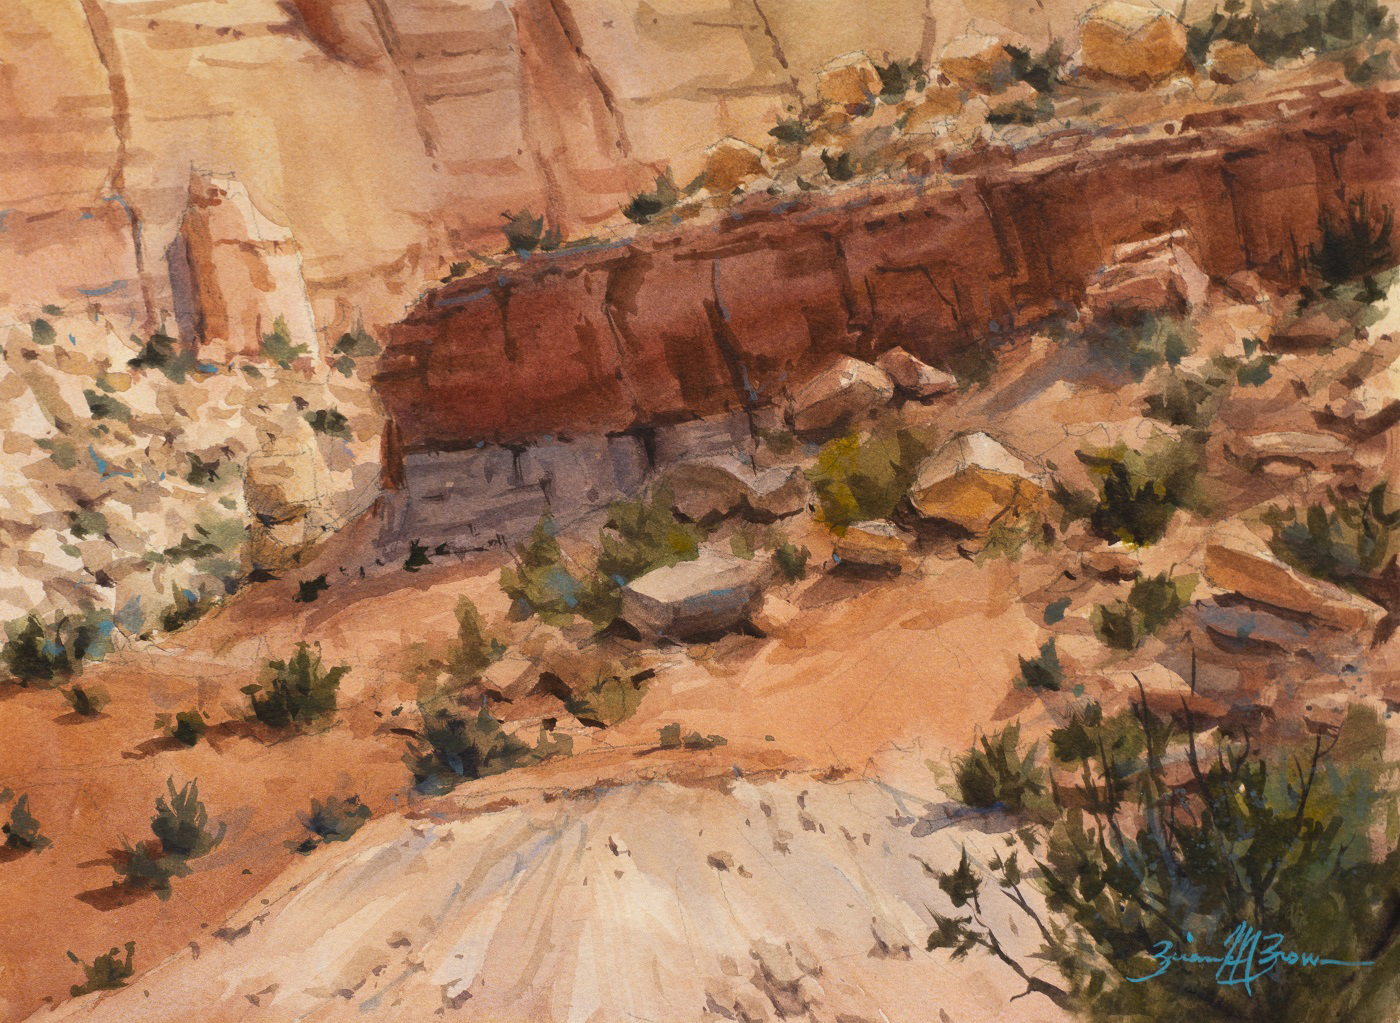 watercolor of birds eye view of red rocks on the desert sun, mixed in with plants